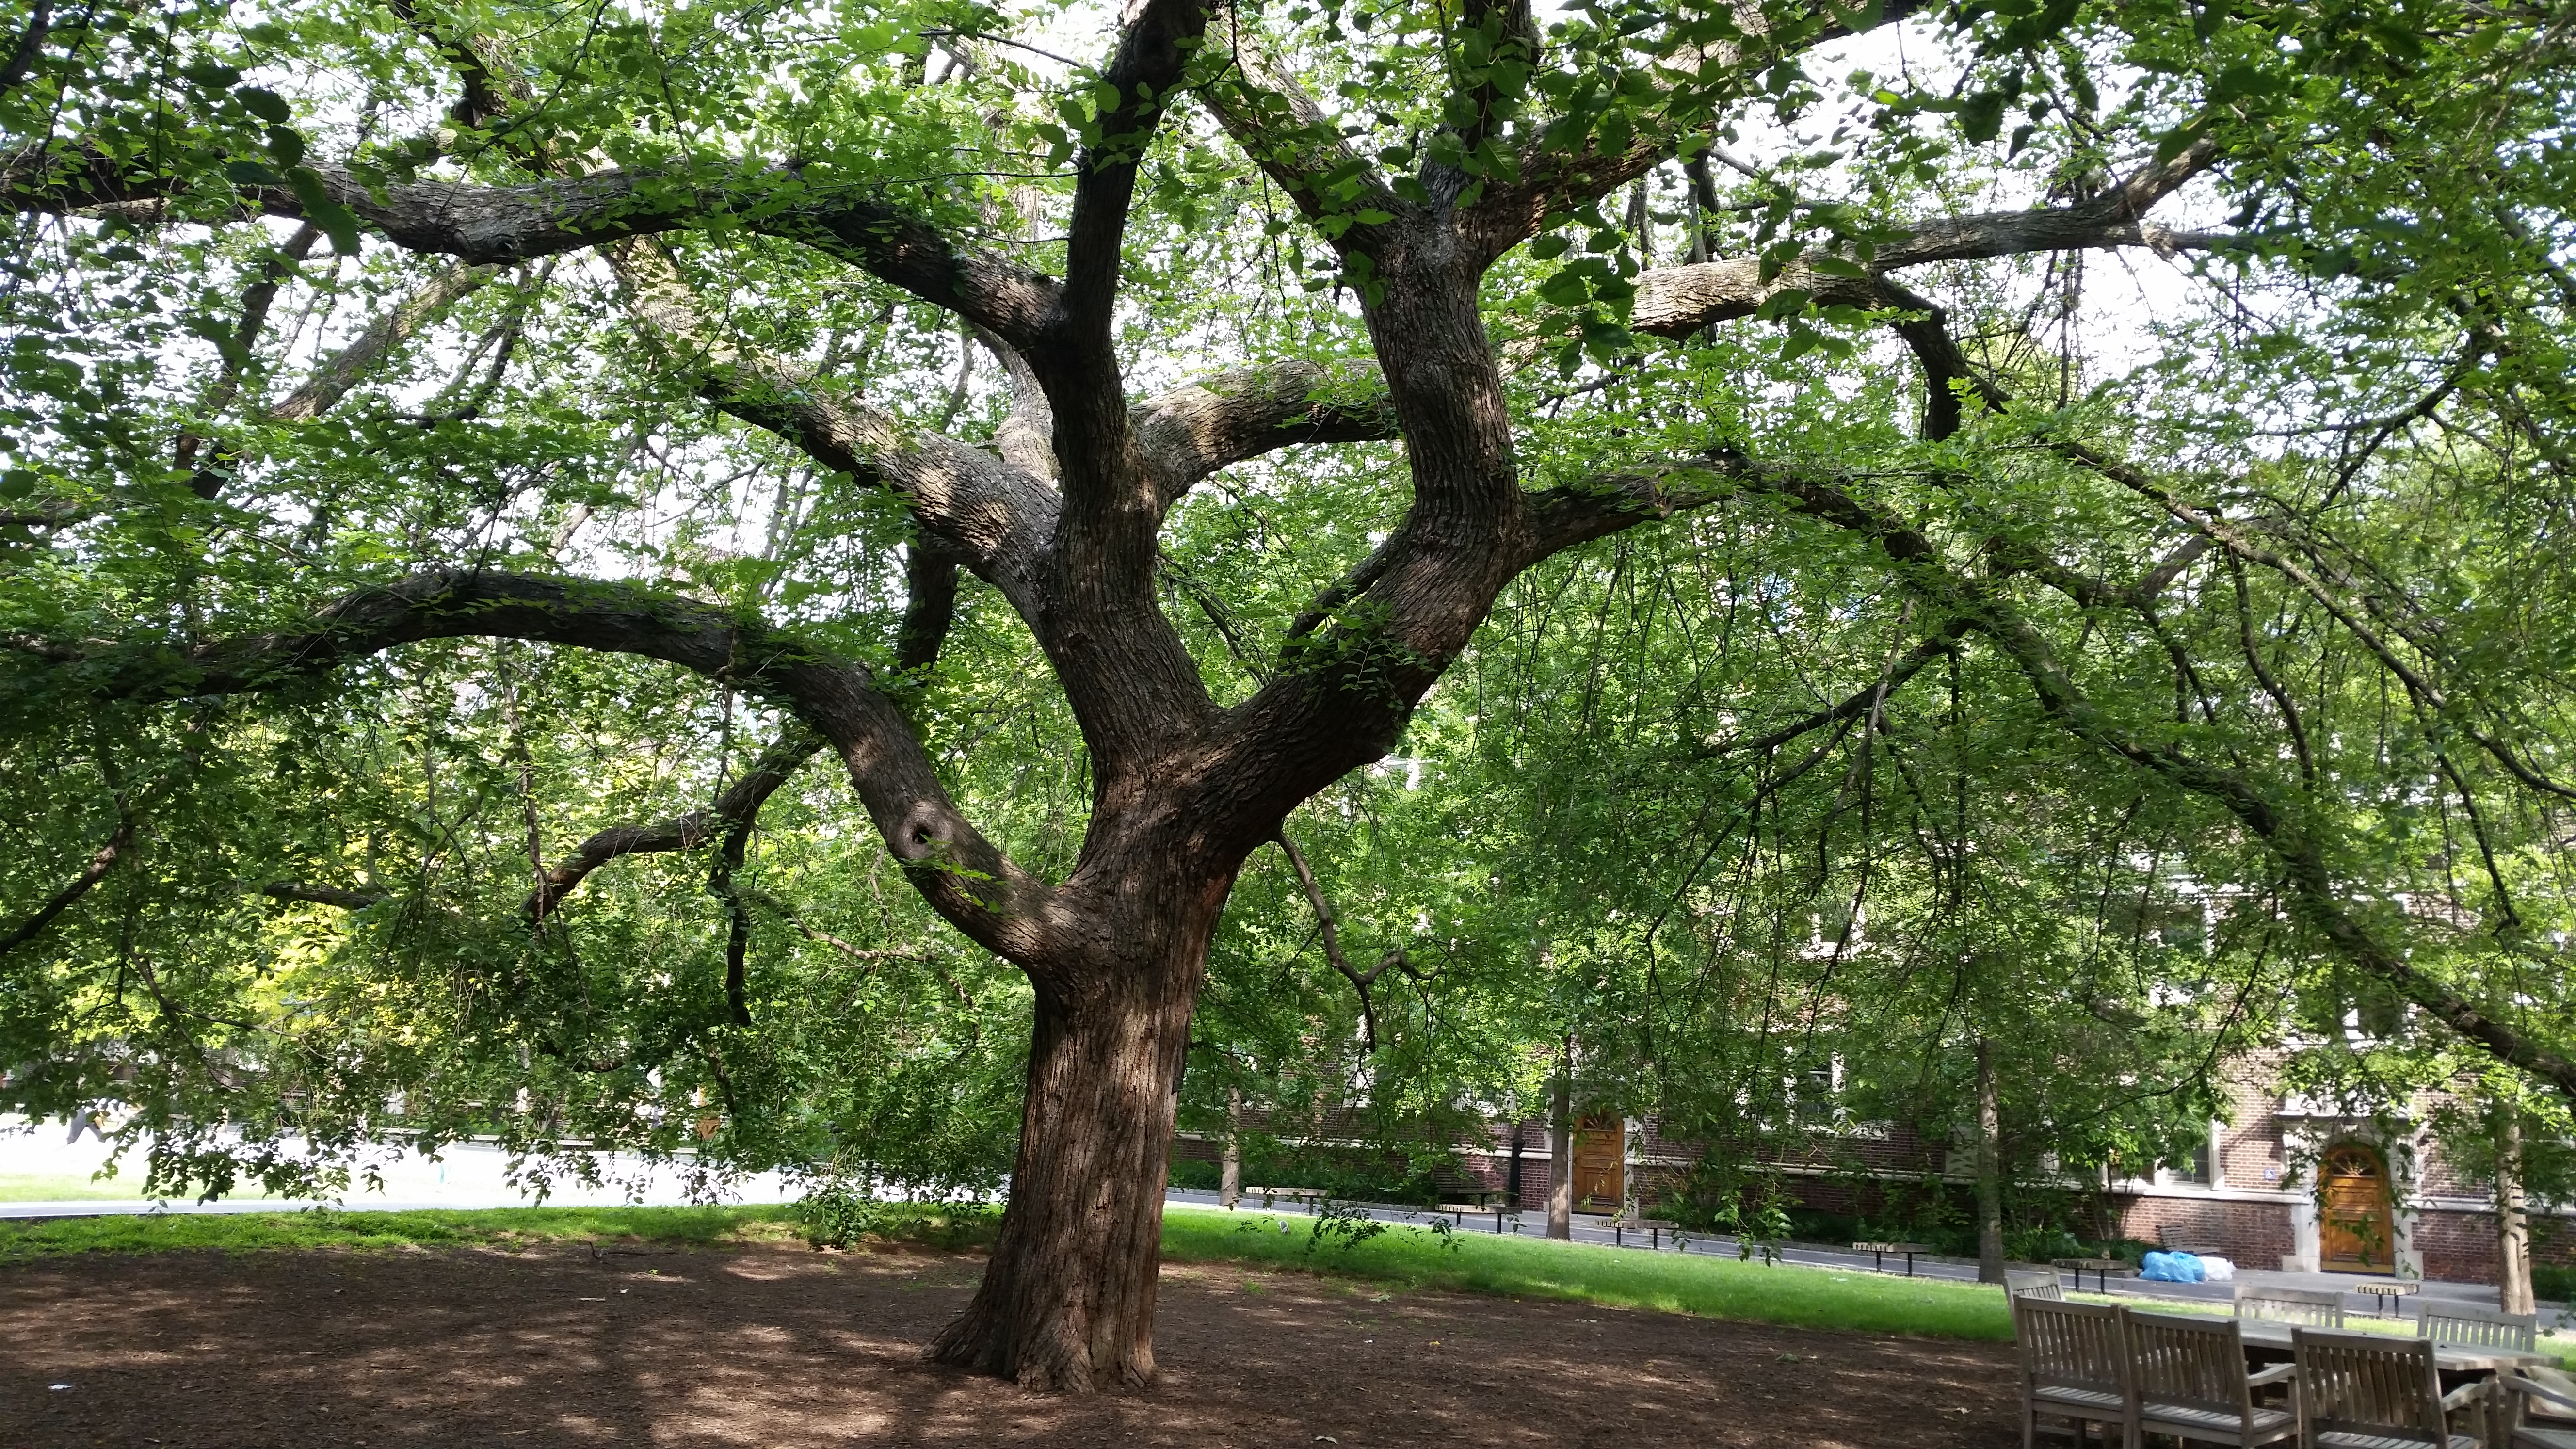 A large tree with stately branches